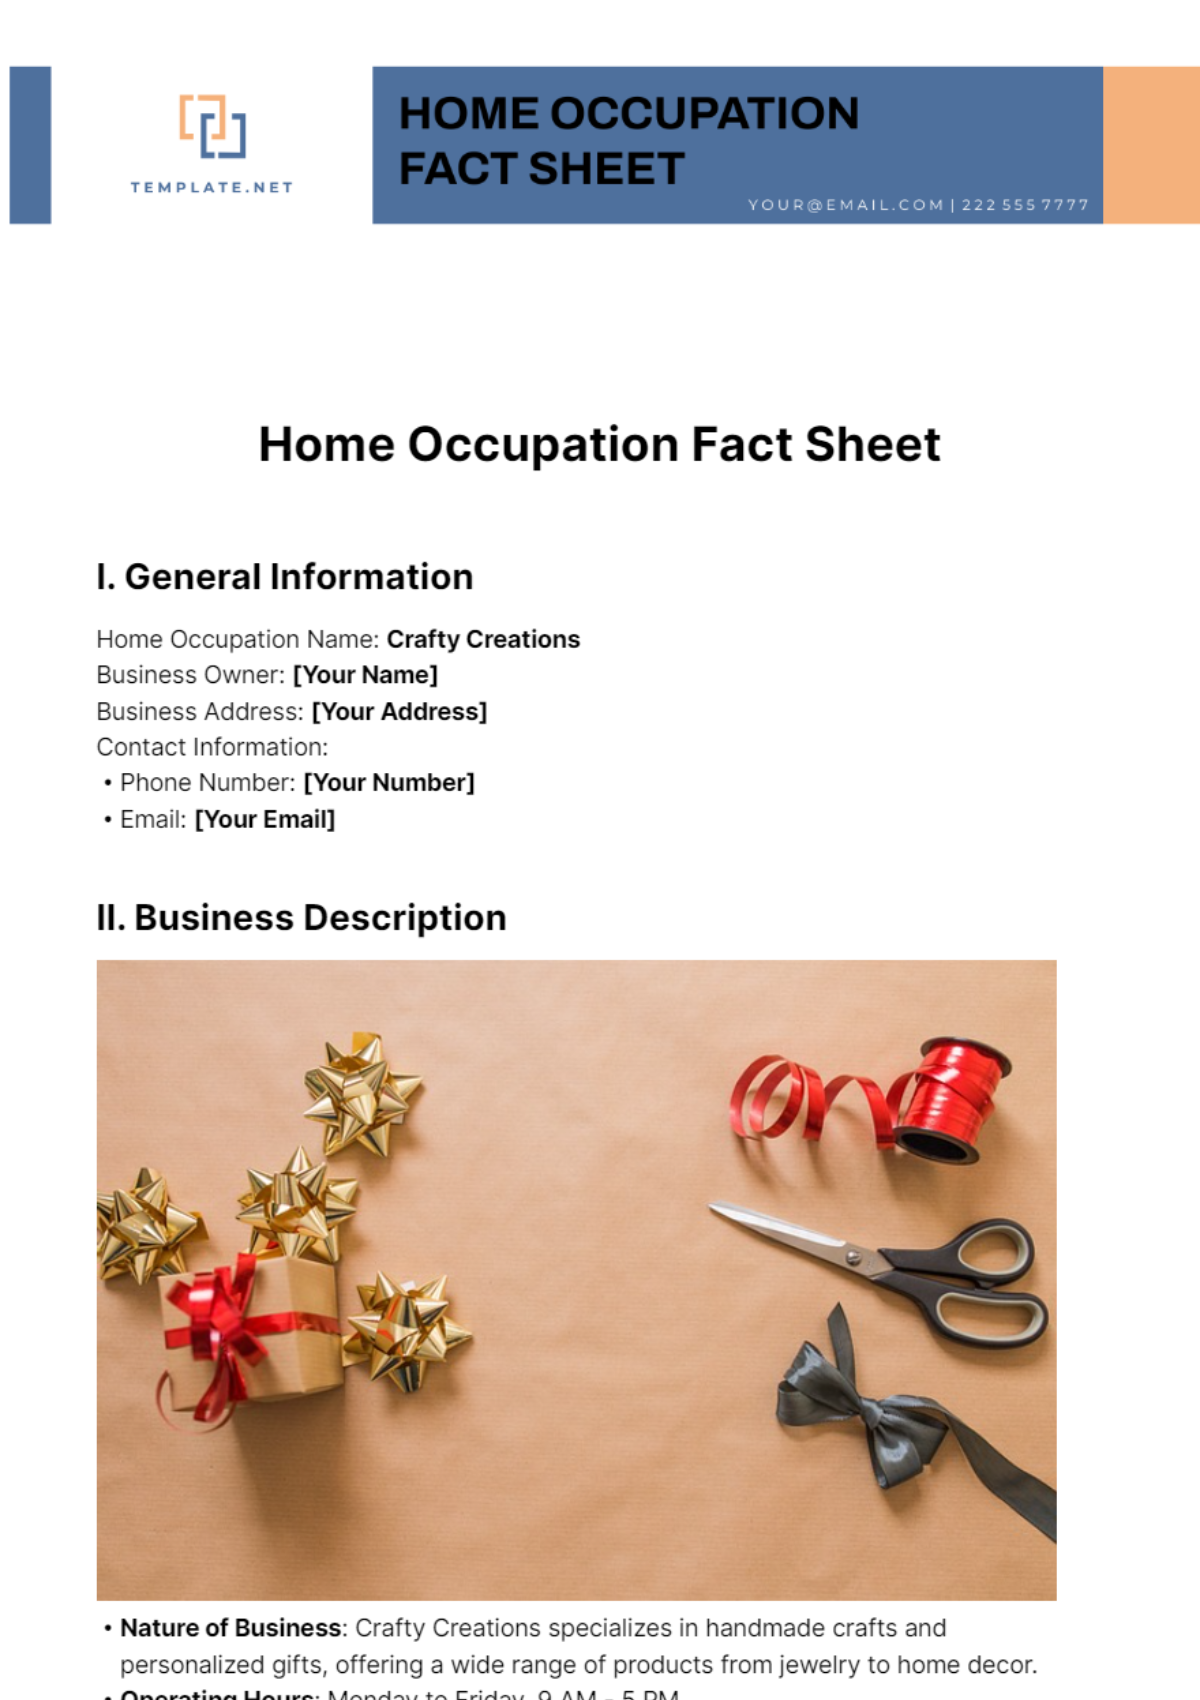 Free Home Occupation Fact Sheet Template